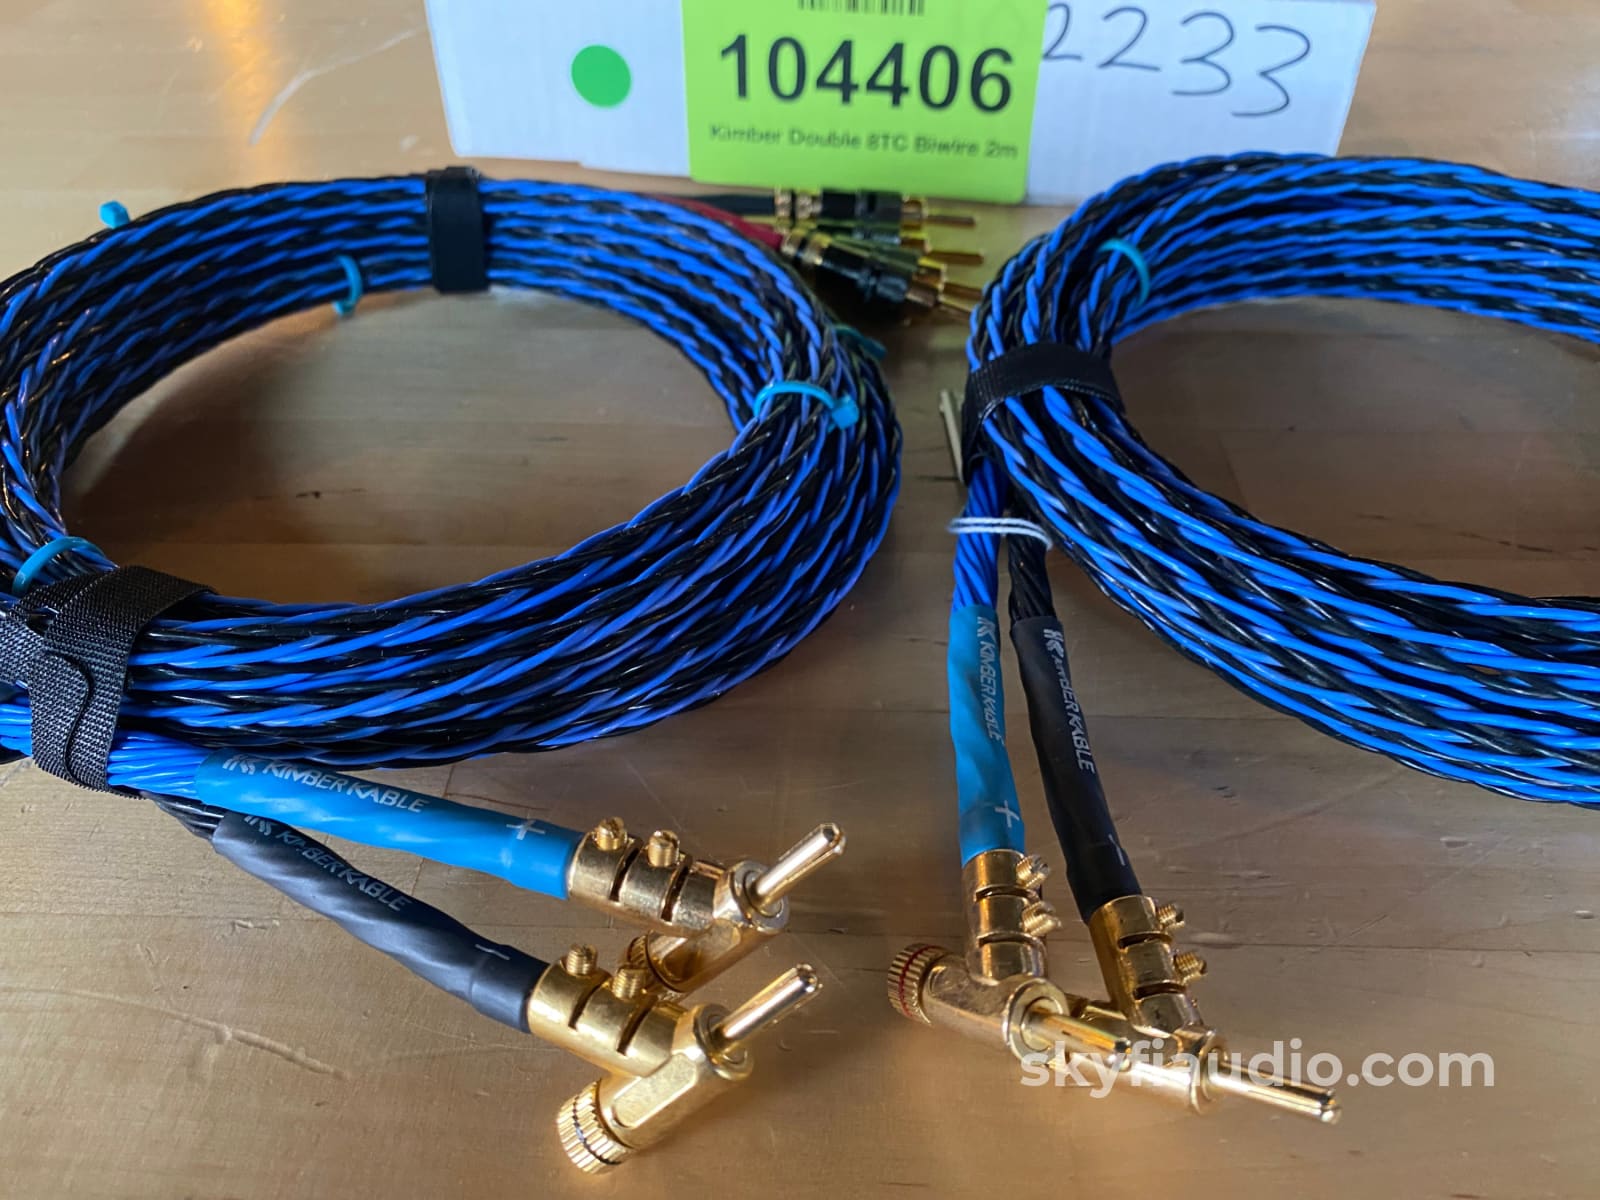 Kimber Kable Double 8Tc Speaker Cables In Bi-Wire Config - 2 Meters